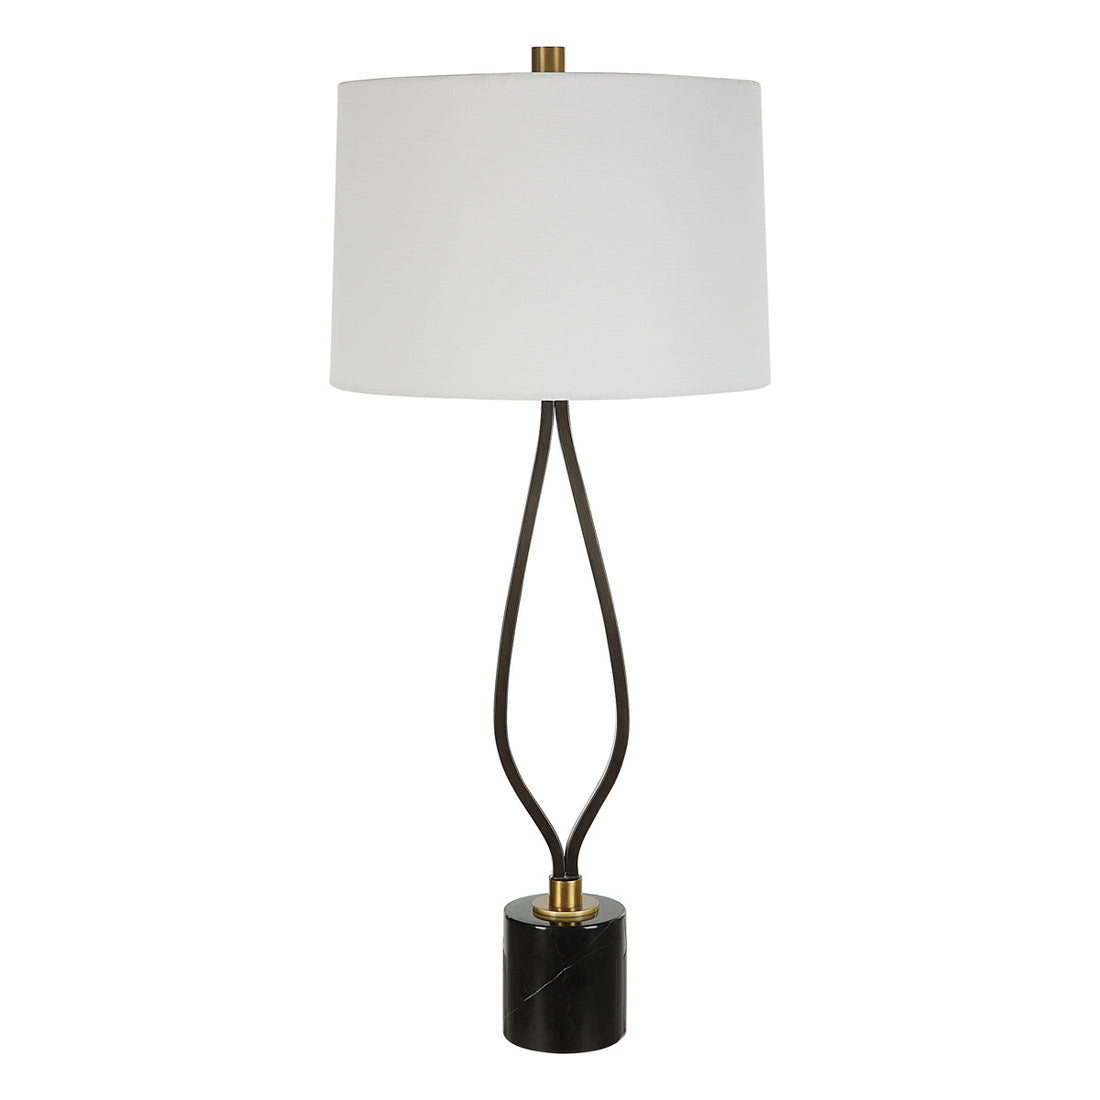 Uttermost Separate Paths Iron Table Lamp